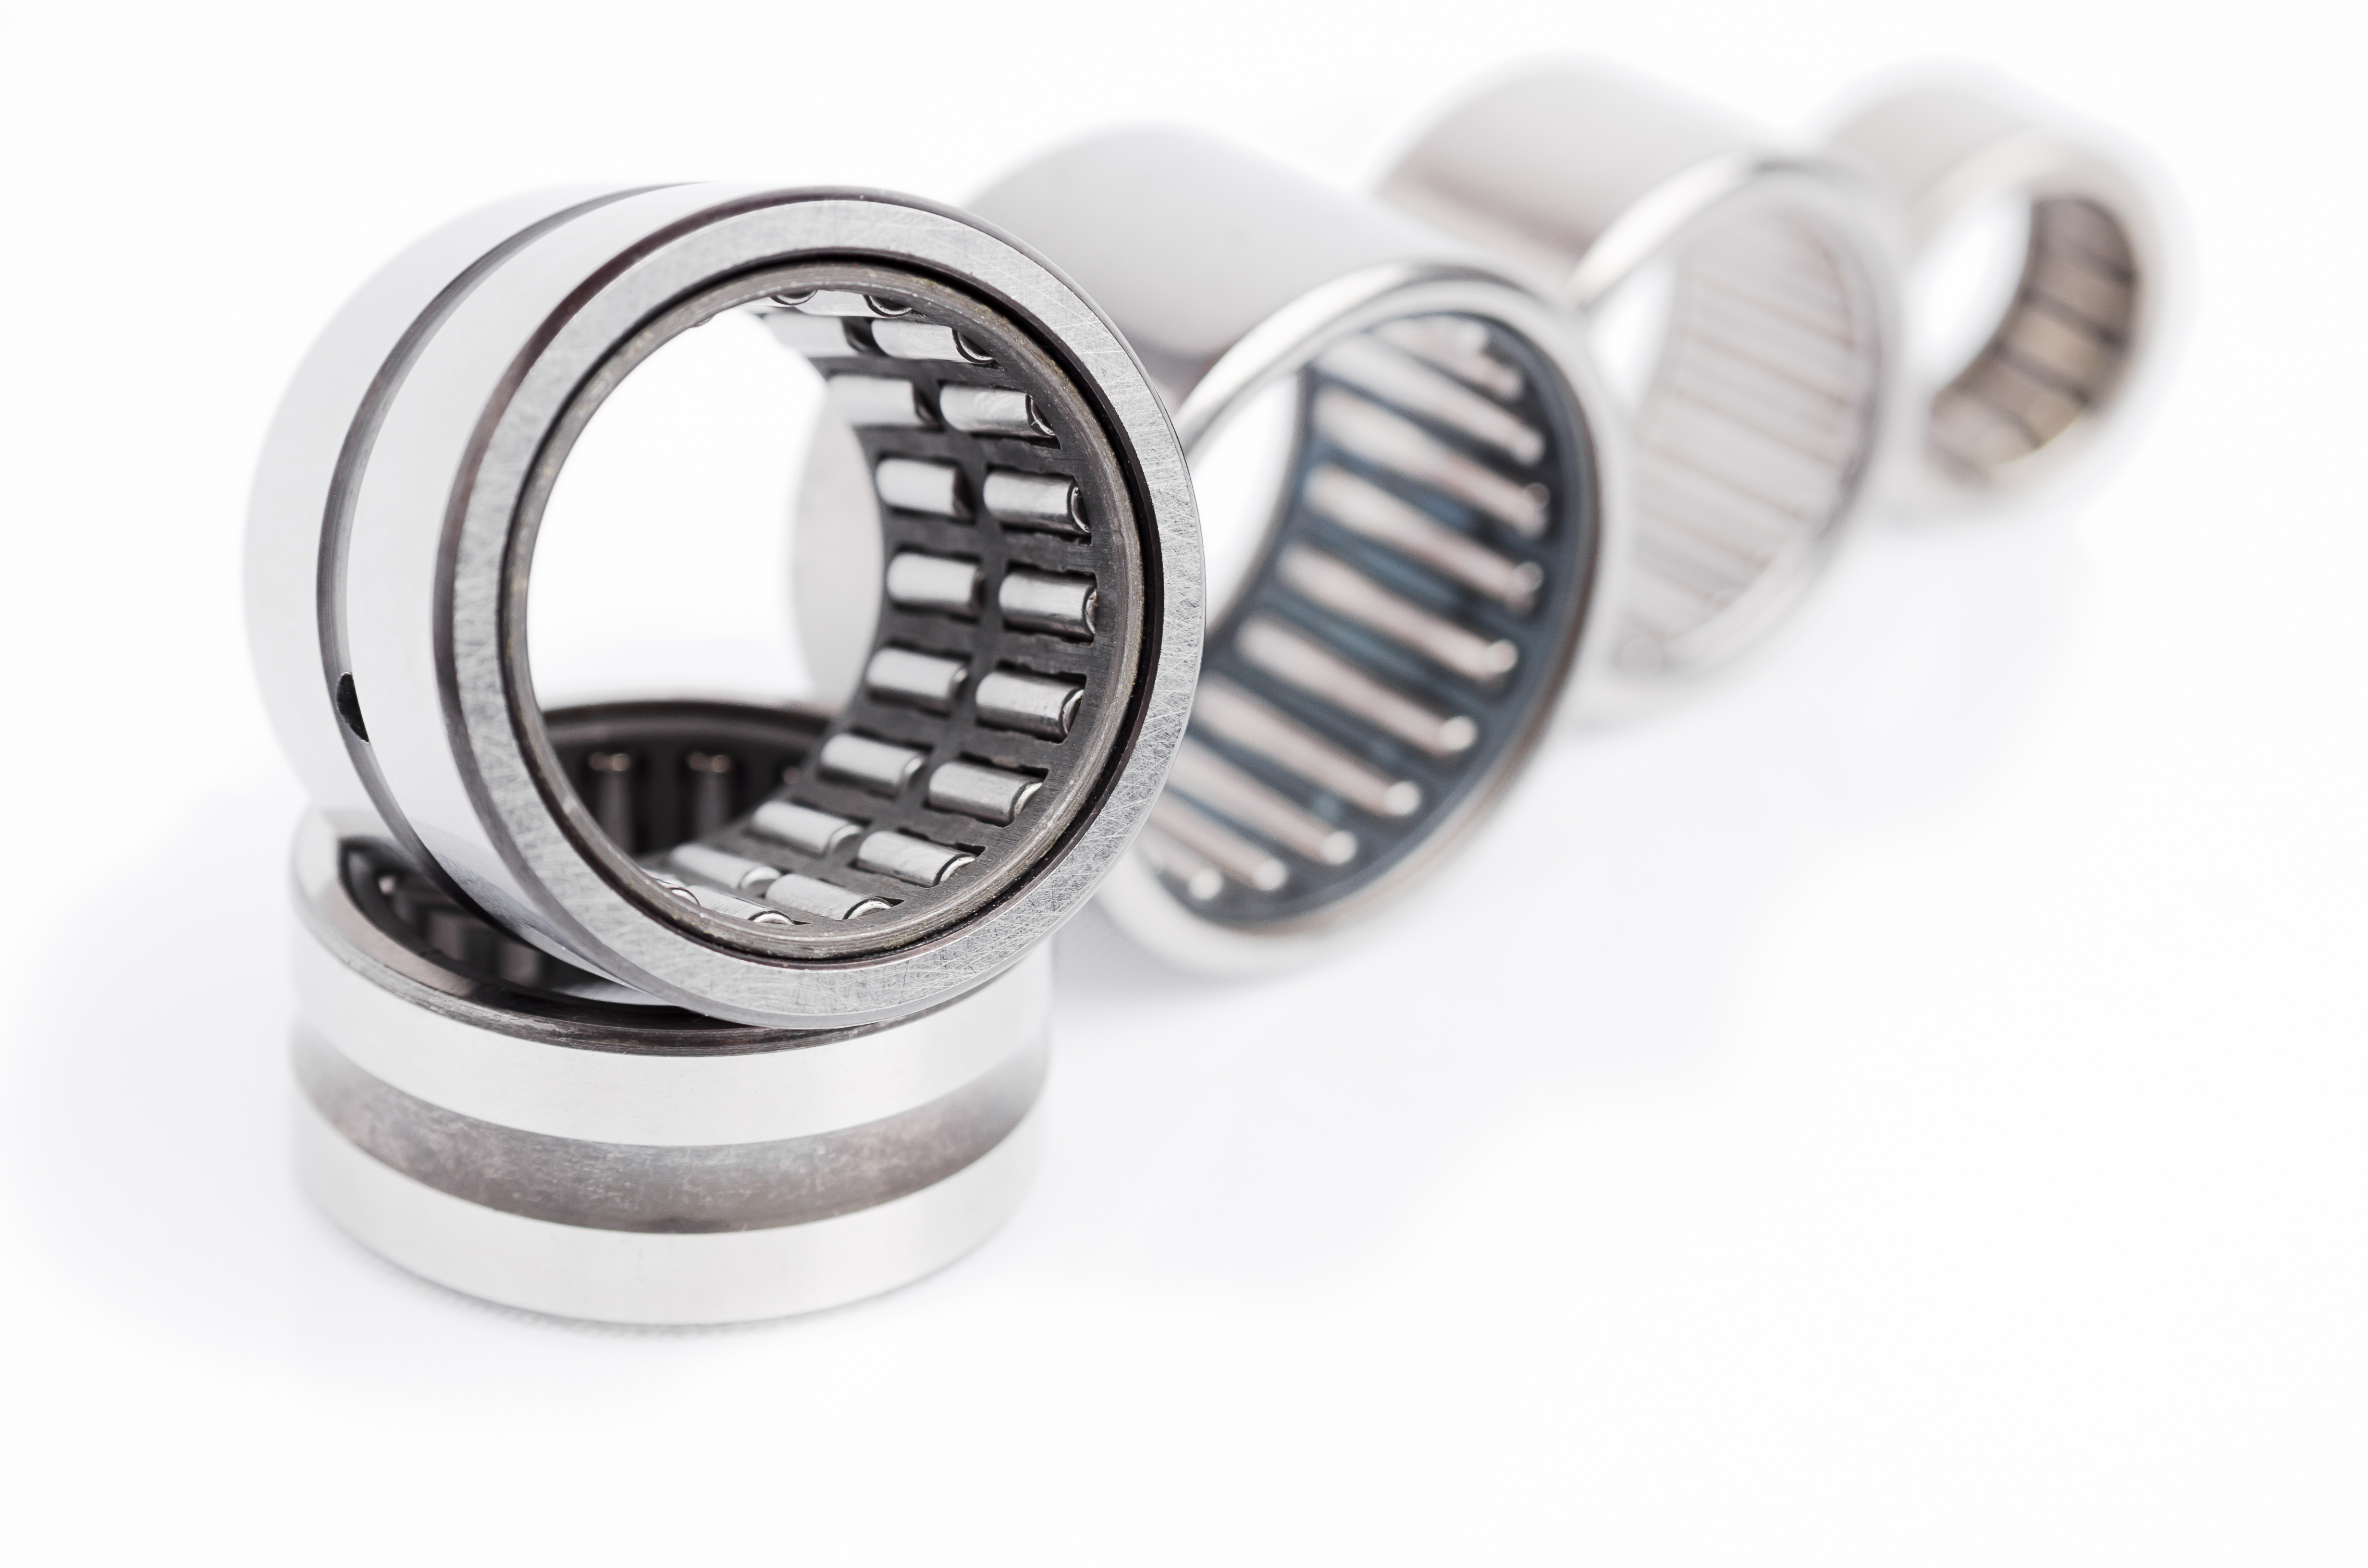 Needle Roller Bearing: Reducing Friction Between Moving Components